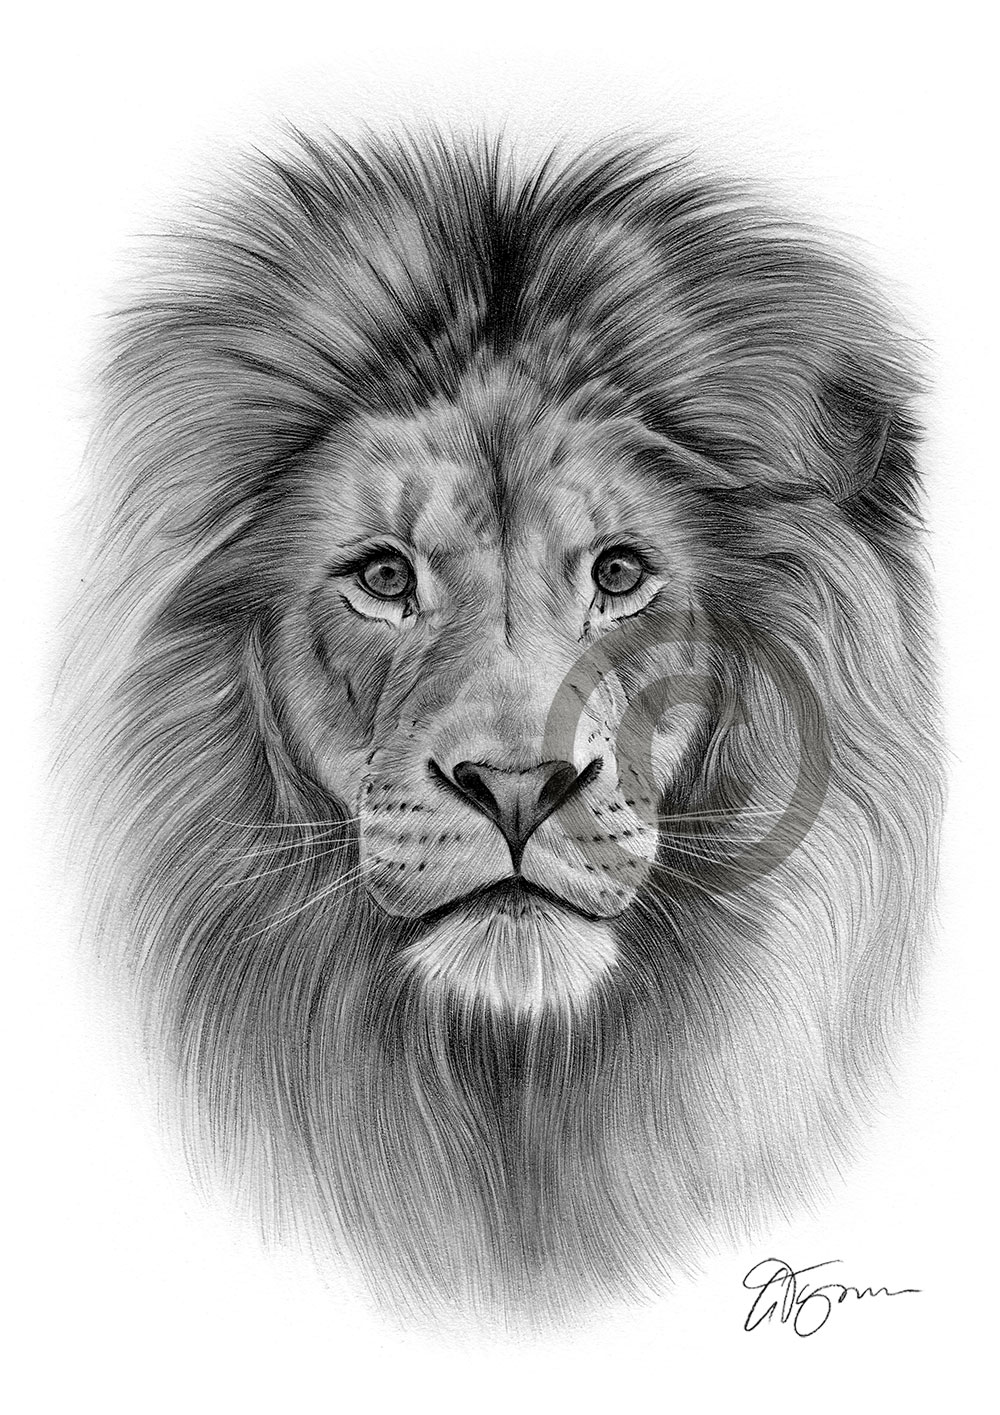 Pencil drawing of an African lion in portrait by artist Gary Tymon